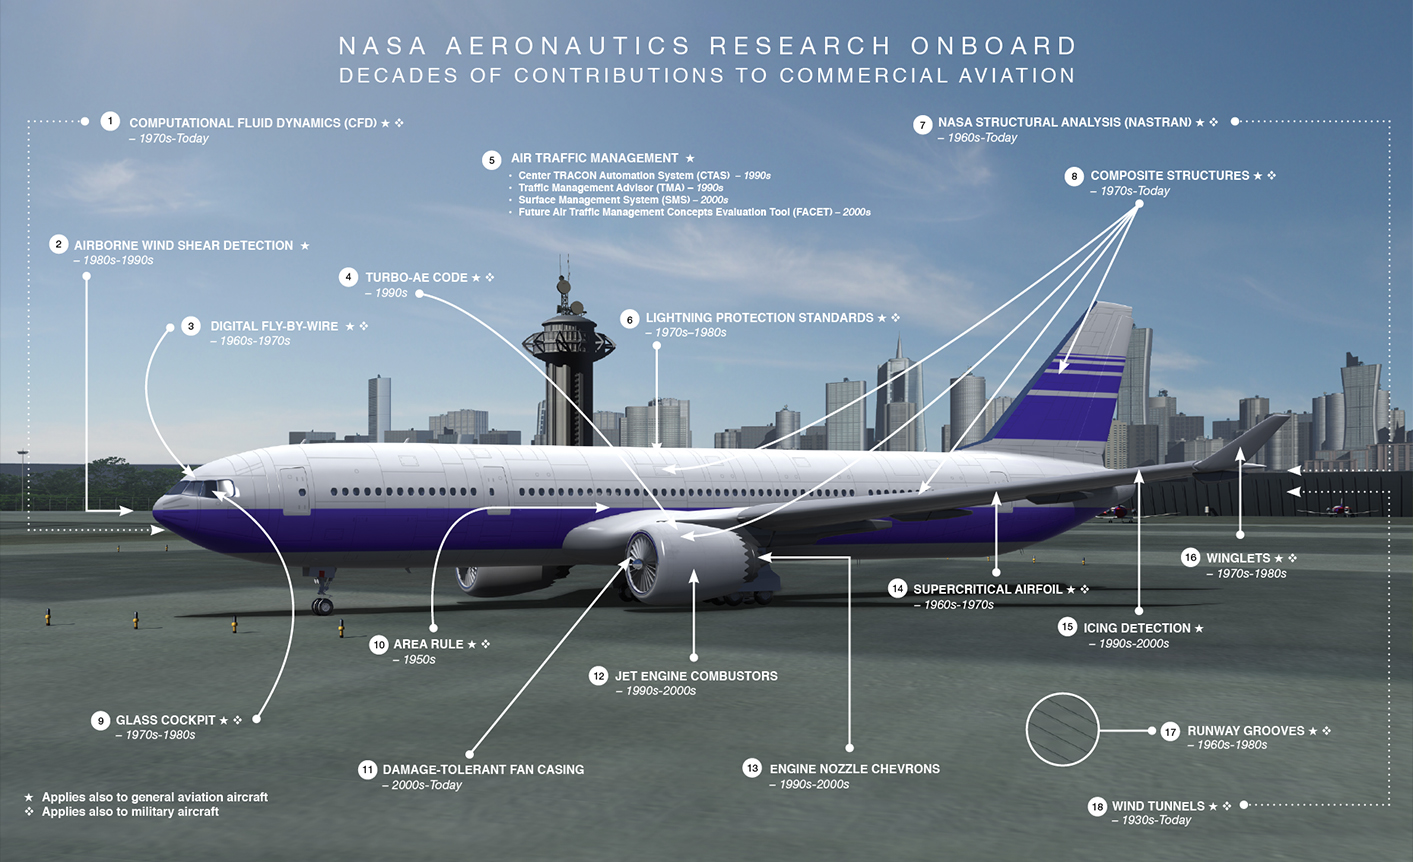 NASA Aeronautics Research Onboard Commercial Aviation. The artist concept shows Computational Fluid Dynamics, Airborne wind shear detection, digital fly-by-wire, turbo-AE code, Air traffic management, lightning protection standards, NASA structural analysis, composite structures, glass cockpit, area rule, damage-tolerant fan casing, jet engine combustors, engine nozzle chevrons, supercritical airfoil, icing detection, winglets, runway grooves and wind tunnels.